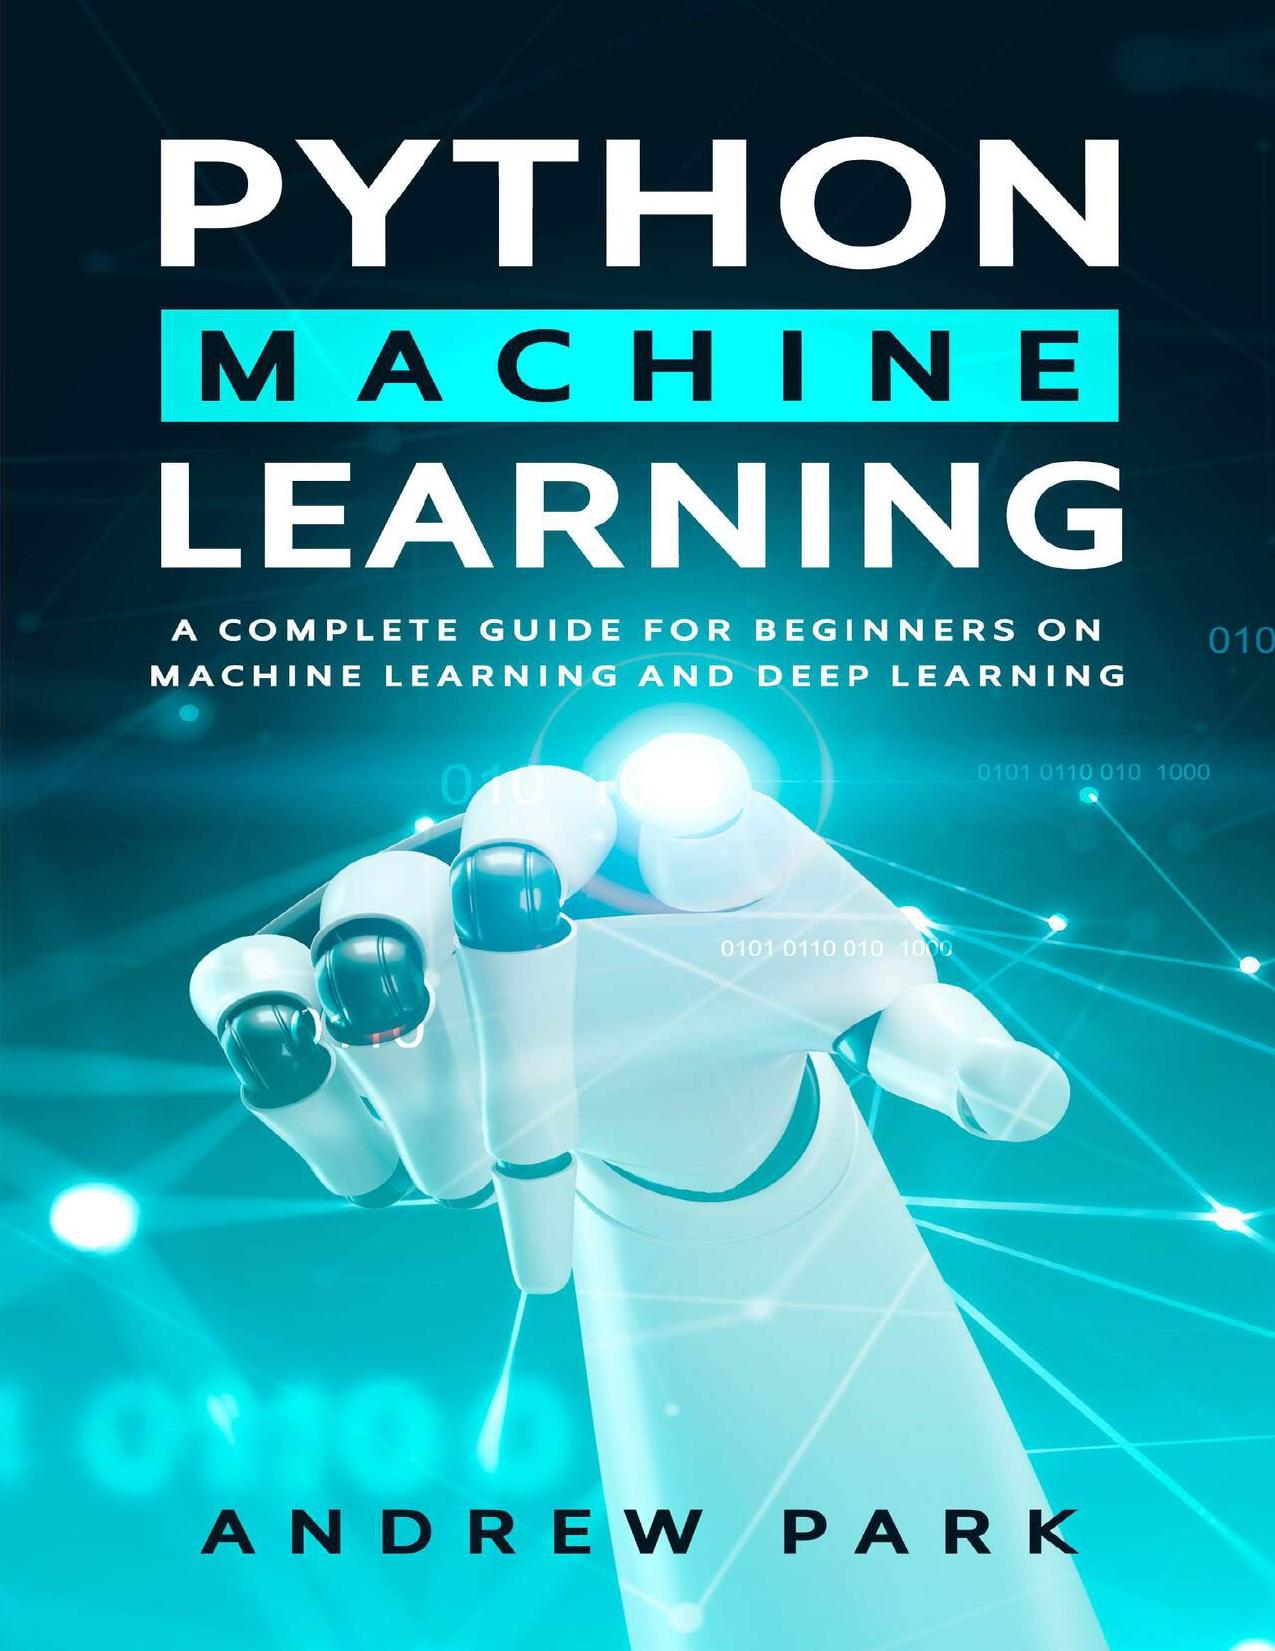 Python Machine Learning: A Complete Guide for Beginners on Machine Learning and Deep Learning with Python (Data Science Mastery Book 4)